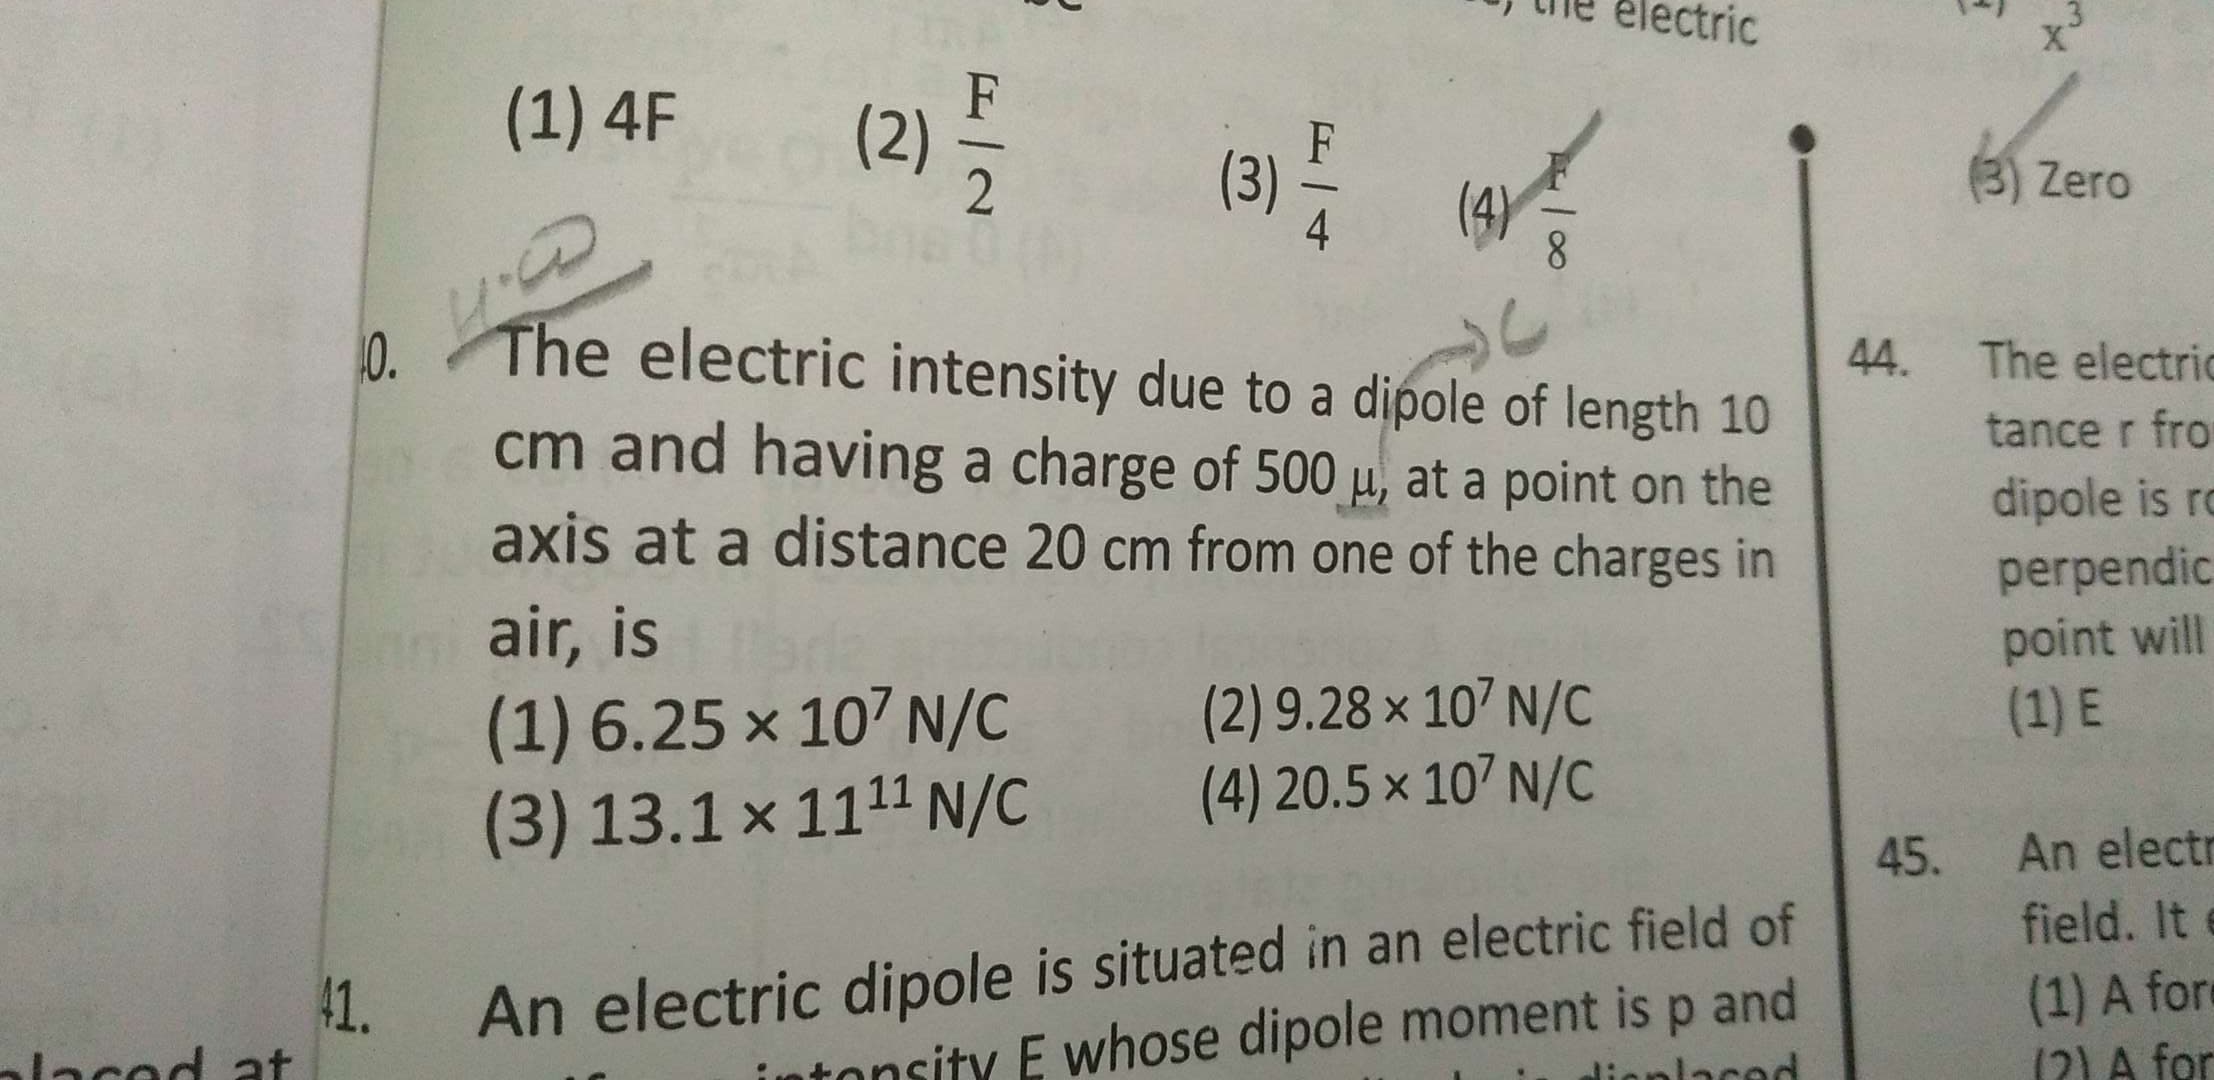 ) he electric
F
(1) 4F
(2) 트
F
(3) Zero
-
(4)
8.
4
44.
The electric intensity due to a dipole of length 10
10.
The electric
cm and having a charge of 500 µ, at a point on the
tance r fro
dipole is ro
axis at a distance 20 cm from one of the charges in
air, is
(1) 6.25 × 107 N/C
(3) 13.1× 1111 N/C
perpendic
point will
(1) E
(2) 9.28 × 107 N/C
(4) 20.5 × 107 N/C
45.
An electr
An electric dipole is situated in an electric field of
E whose dipole moment is p and
field. It e
41.
(1) A fore
(2) A for
